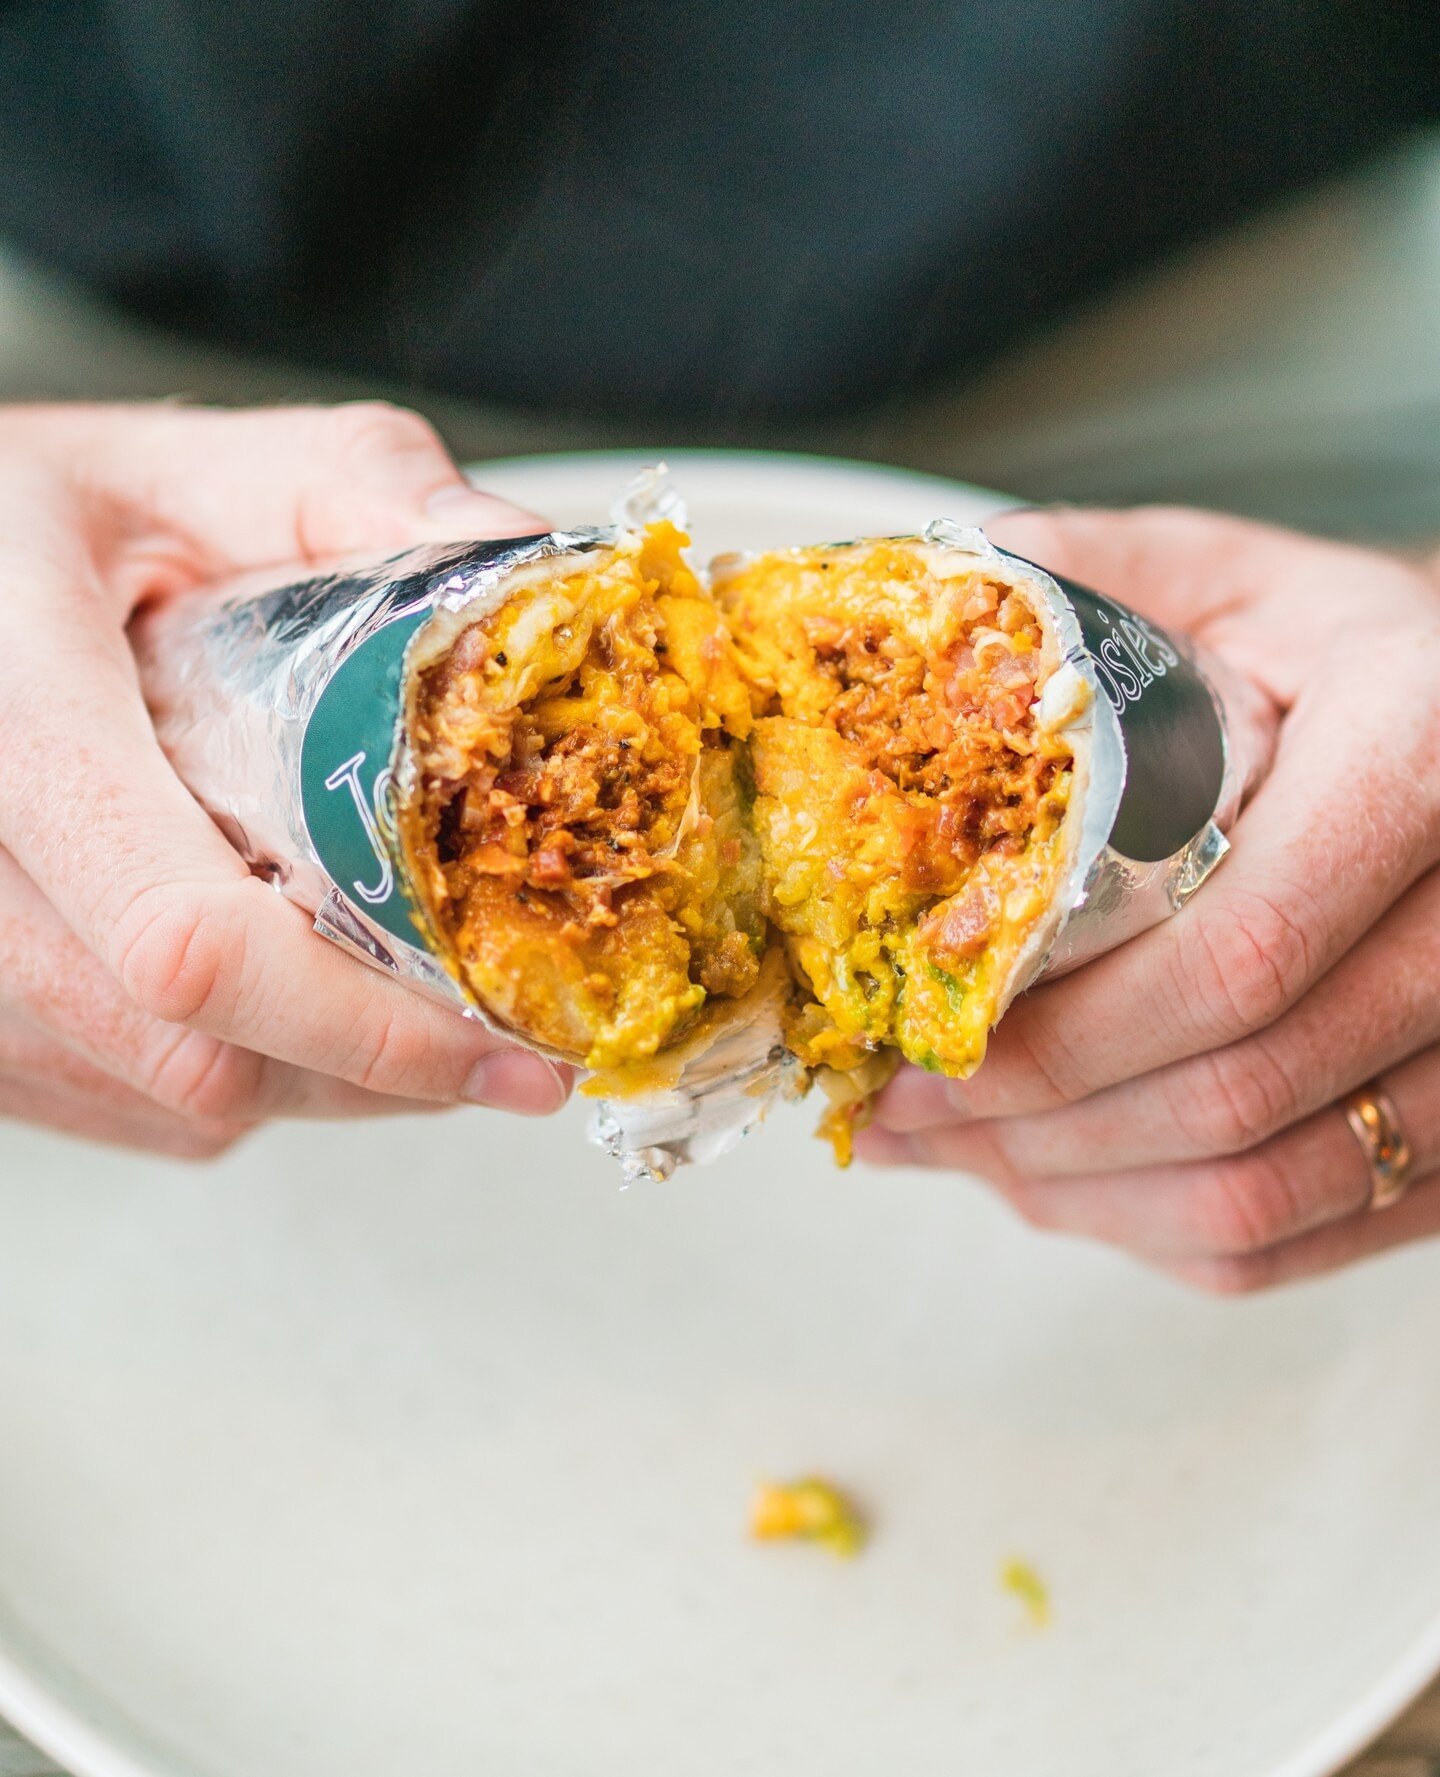 Life is too short for boring breakfasts! Spice things up with a delicious breakfast burrito 🌶️🌯